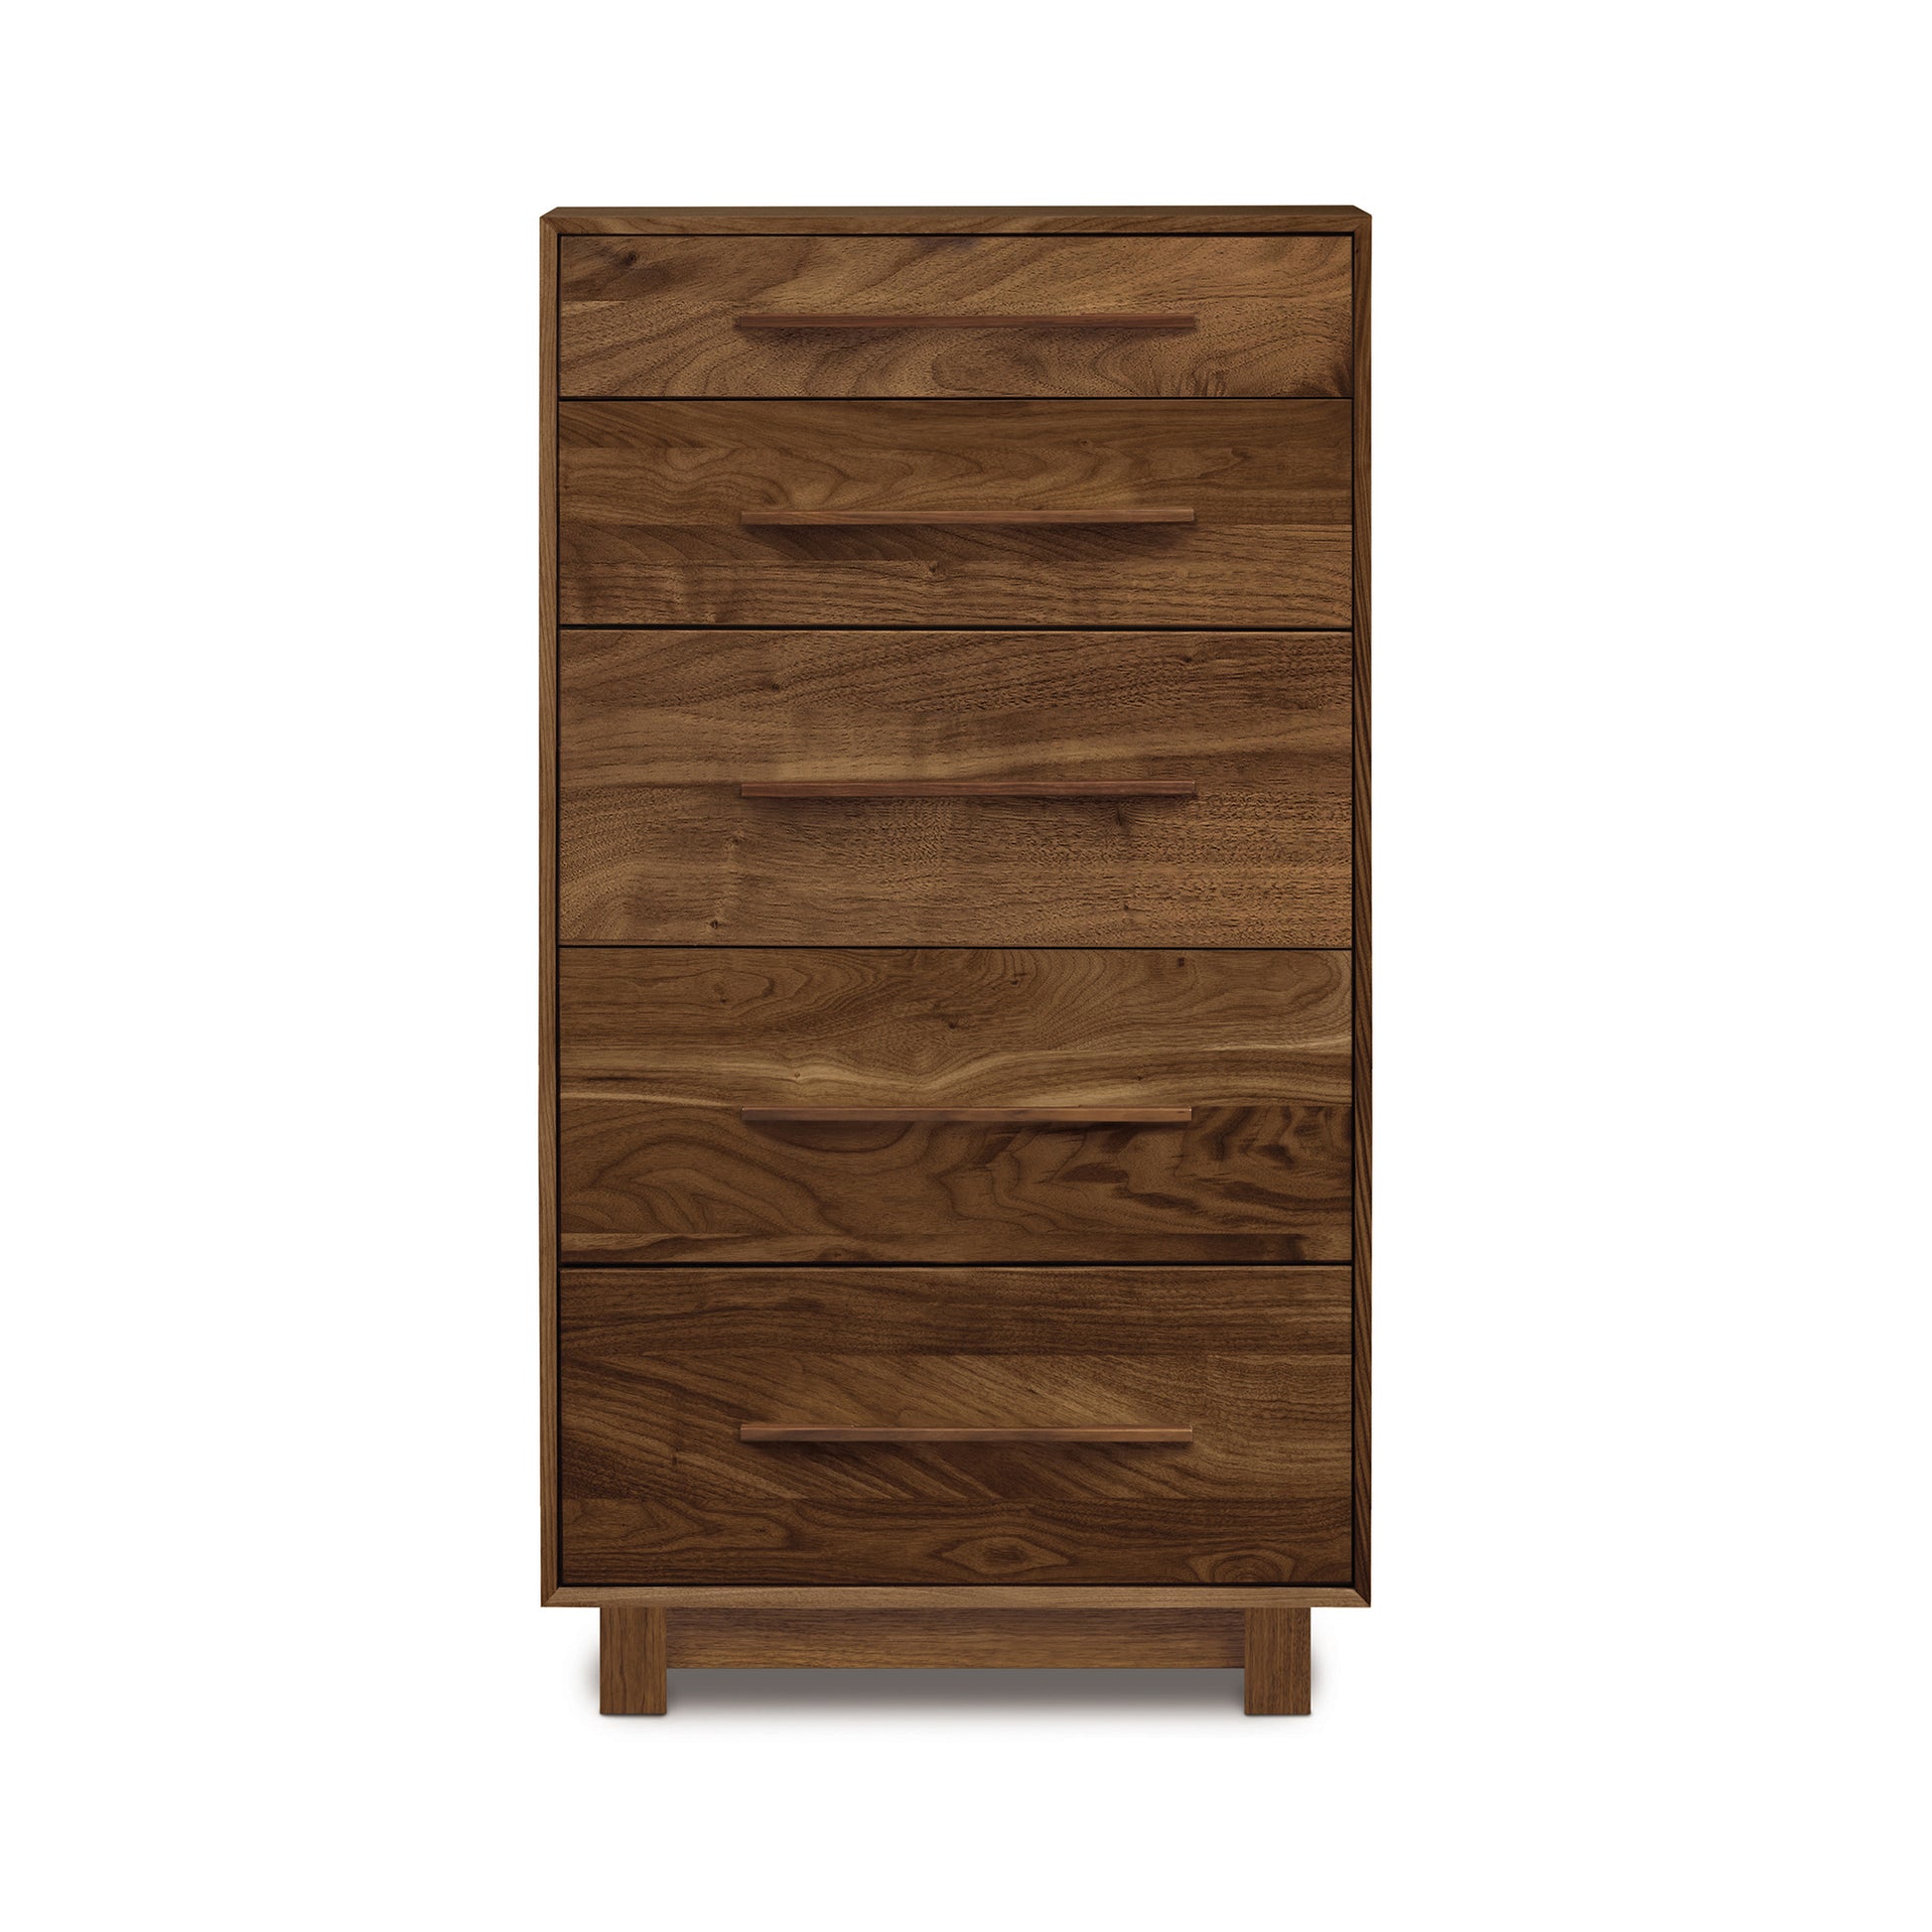 A modern Sloane 5-Drawer Narrow Chest by Copeland Furniture.